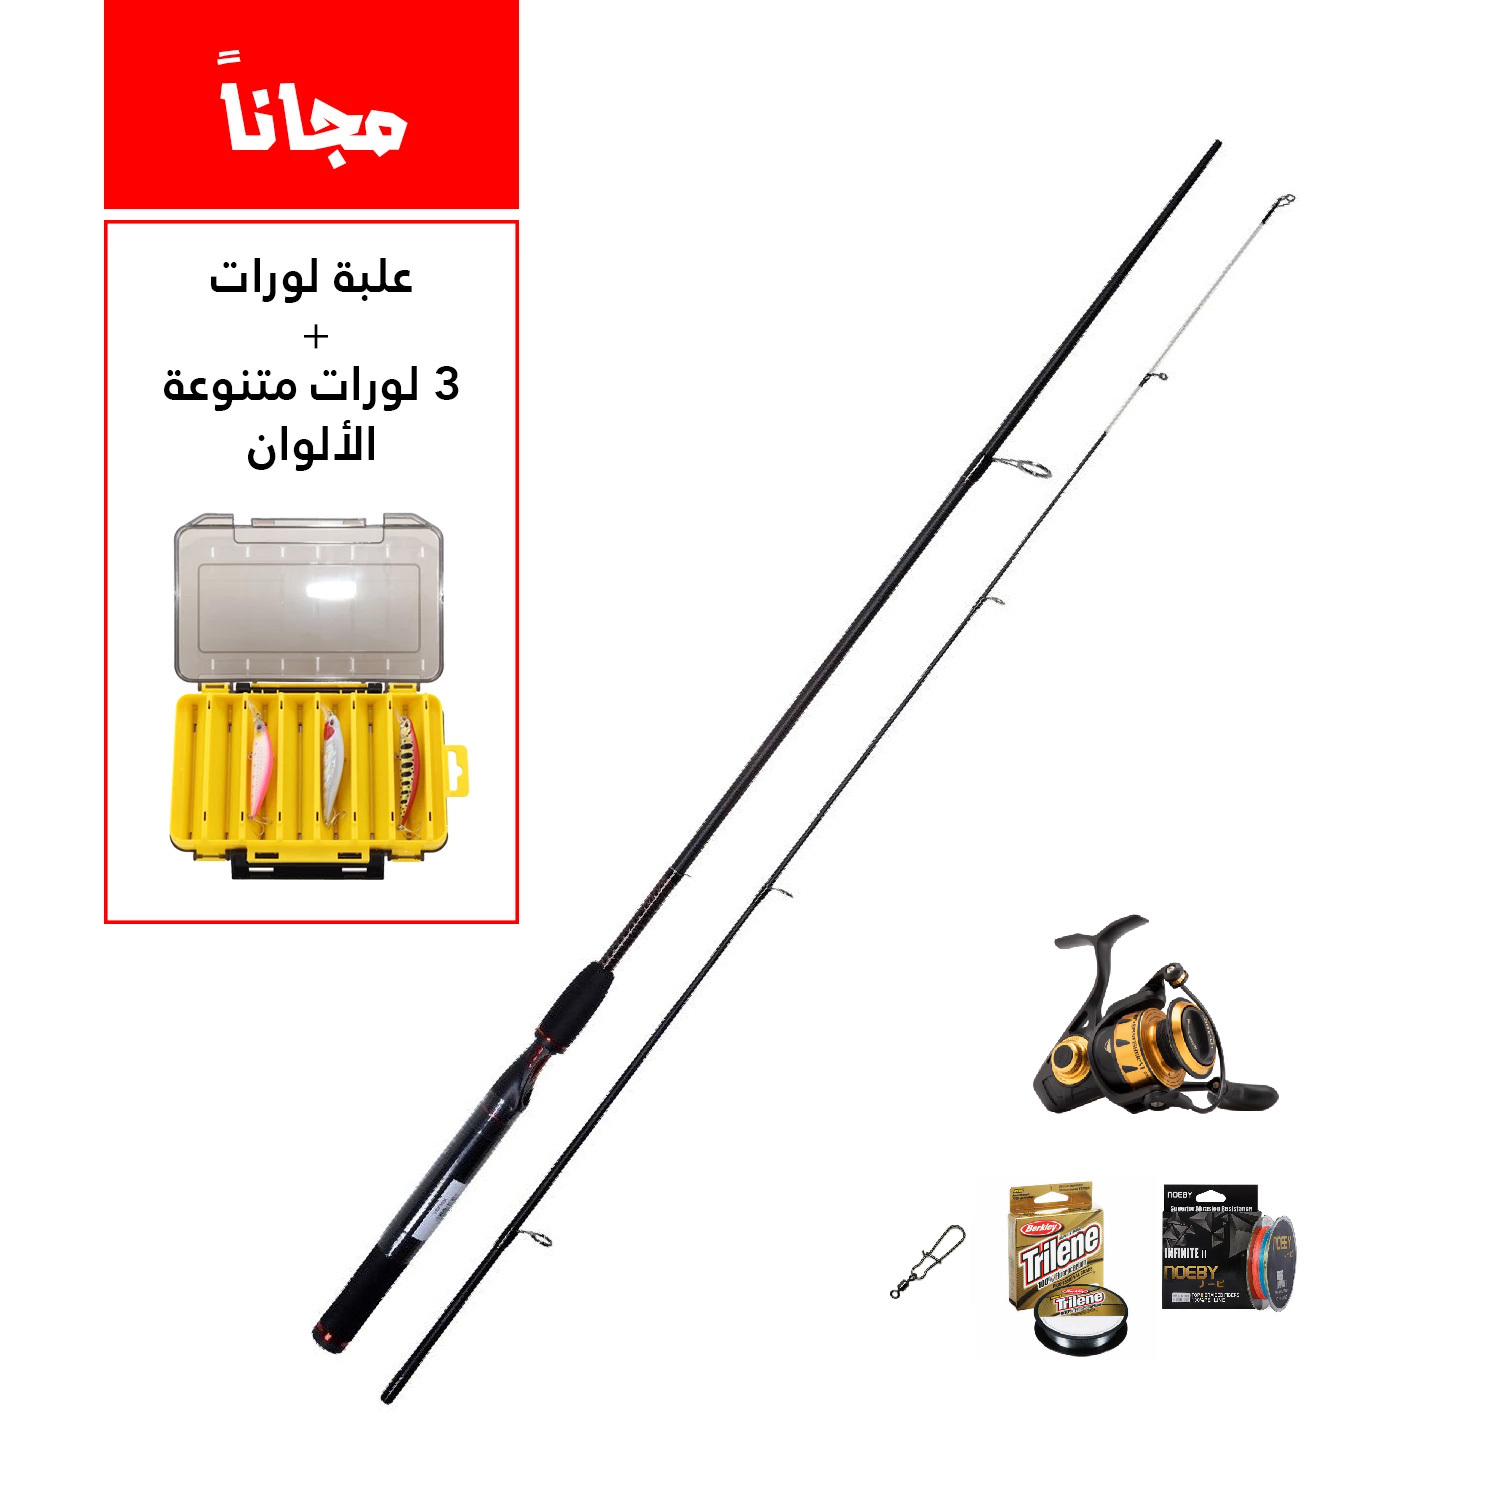 CASTING (UGLY STICK SHAKESPEARE GX2 US SPIN 2.7m ROD & PENN SPINFISHER® VI SPINNING 2500 REEL) COMBO